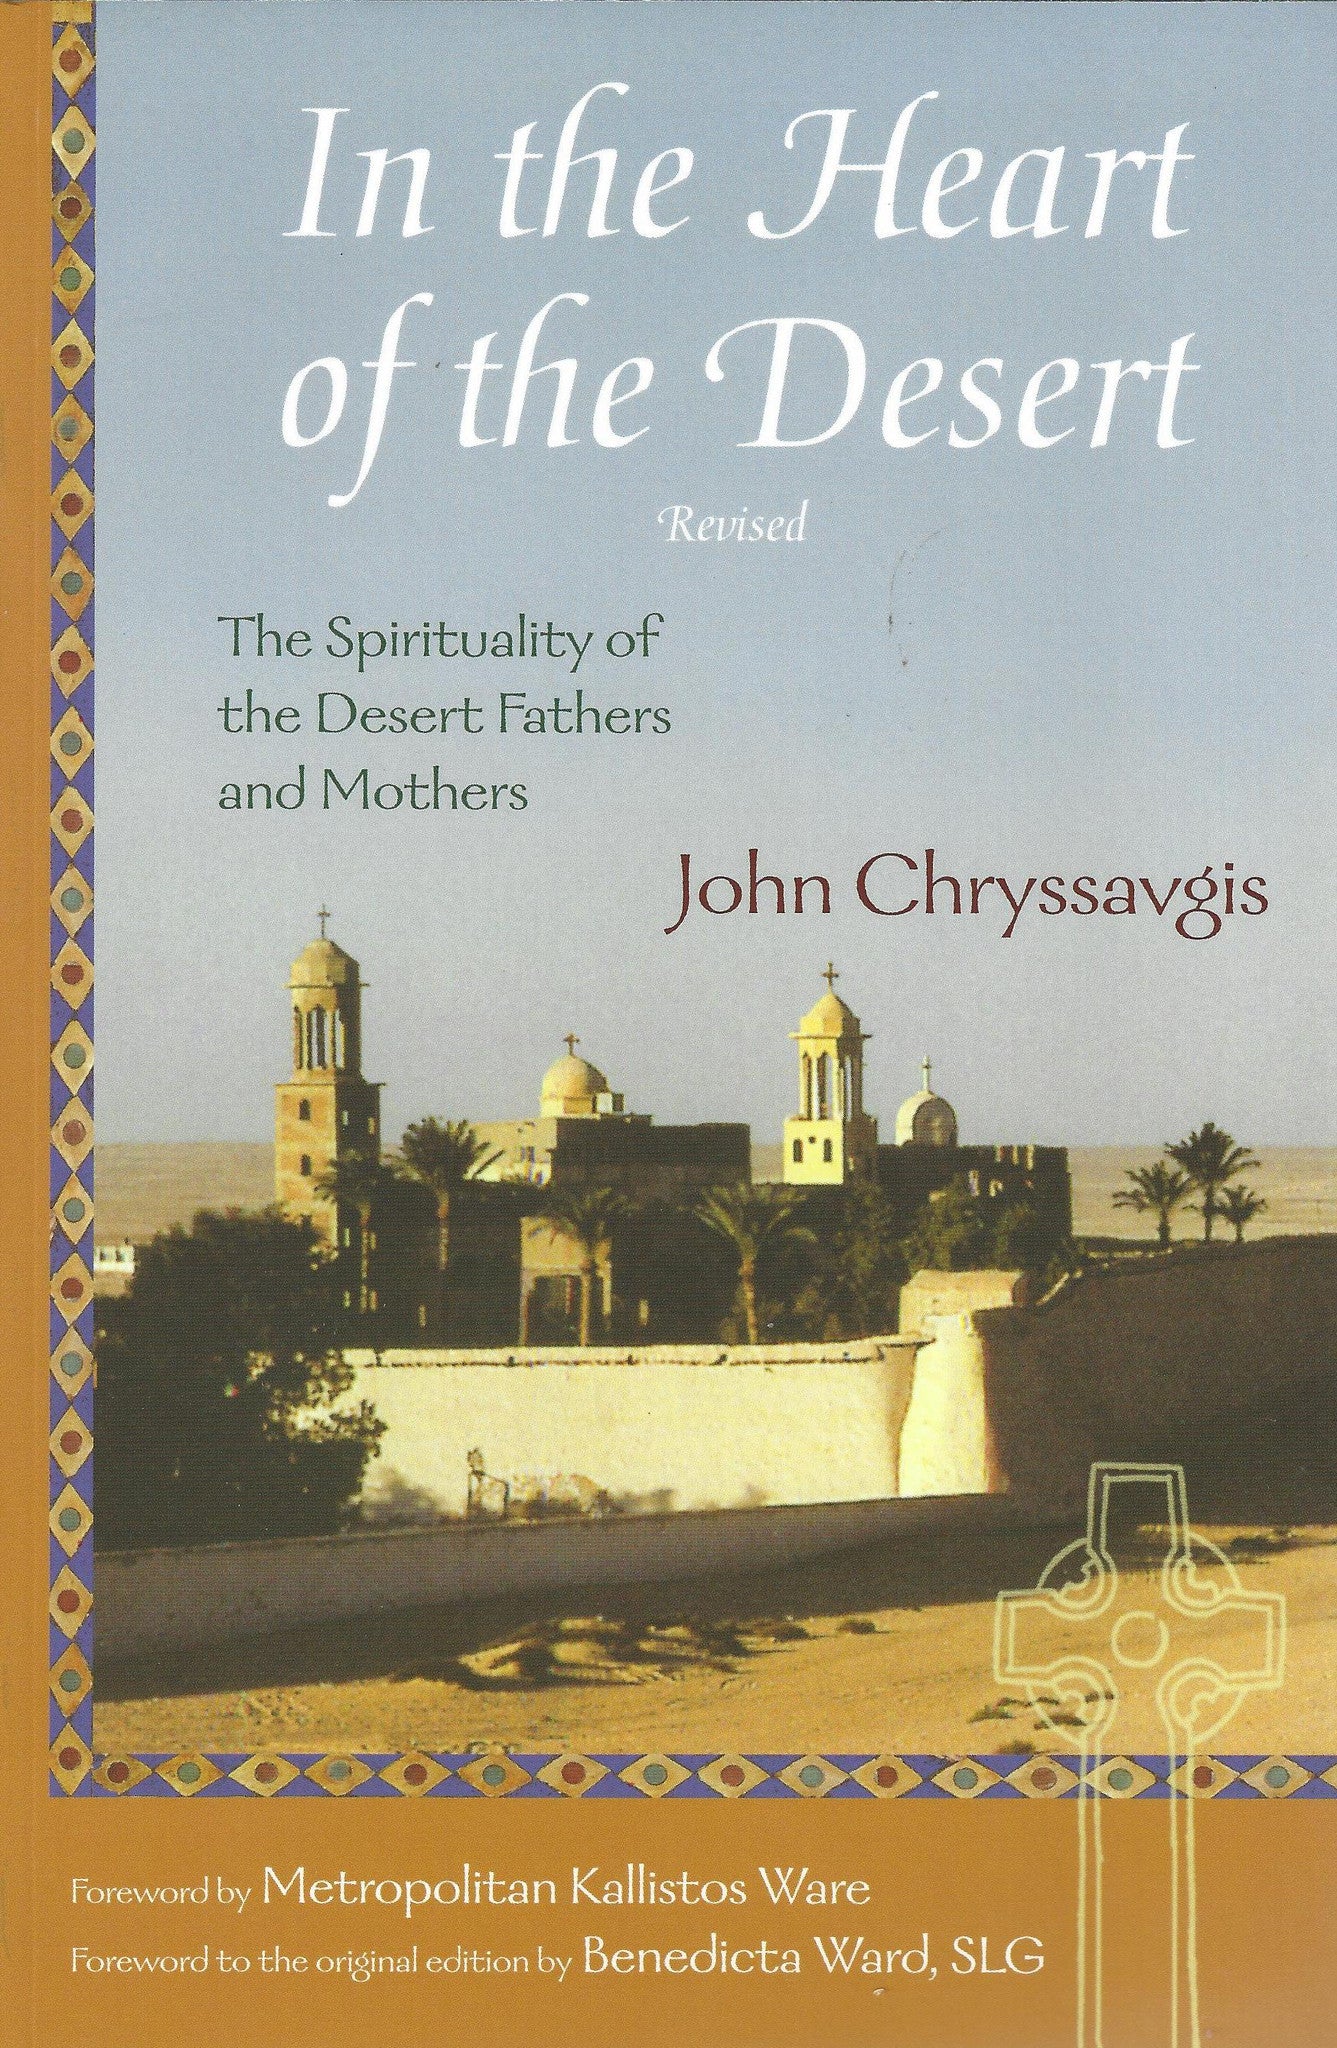 In the Heart of the Desert: The Spirituality of the Desert Fathers and Mothers , Book - Daybreak International Bookstore, Daybreak Press Global Bookshop
